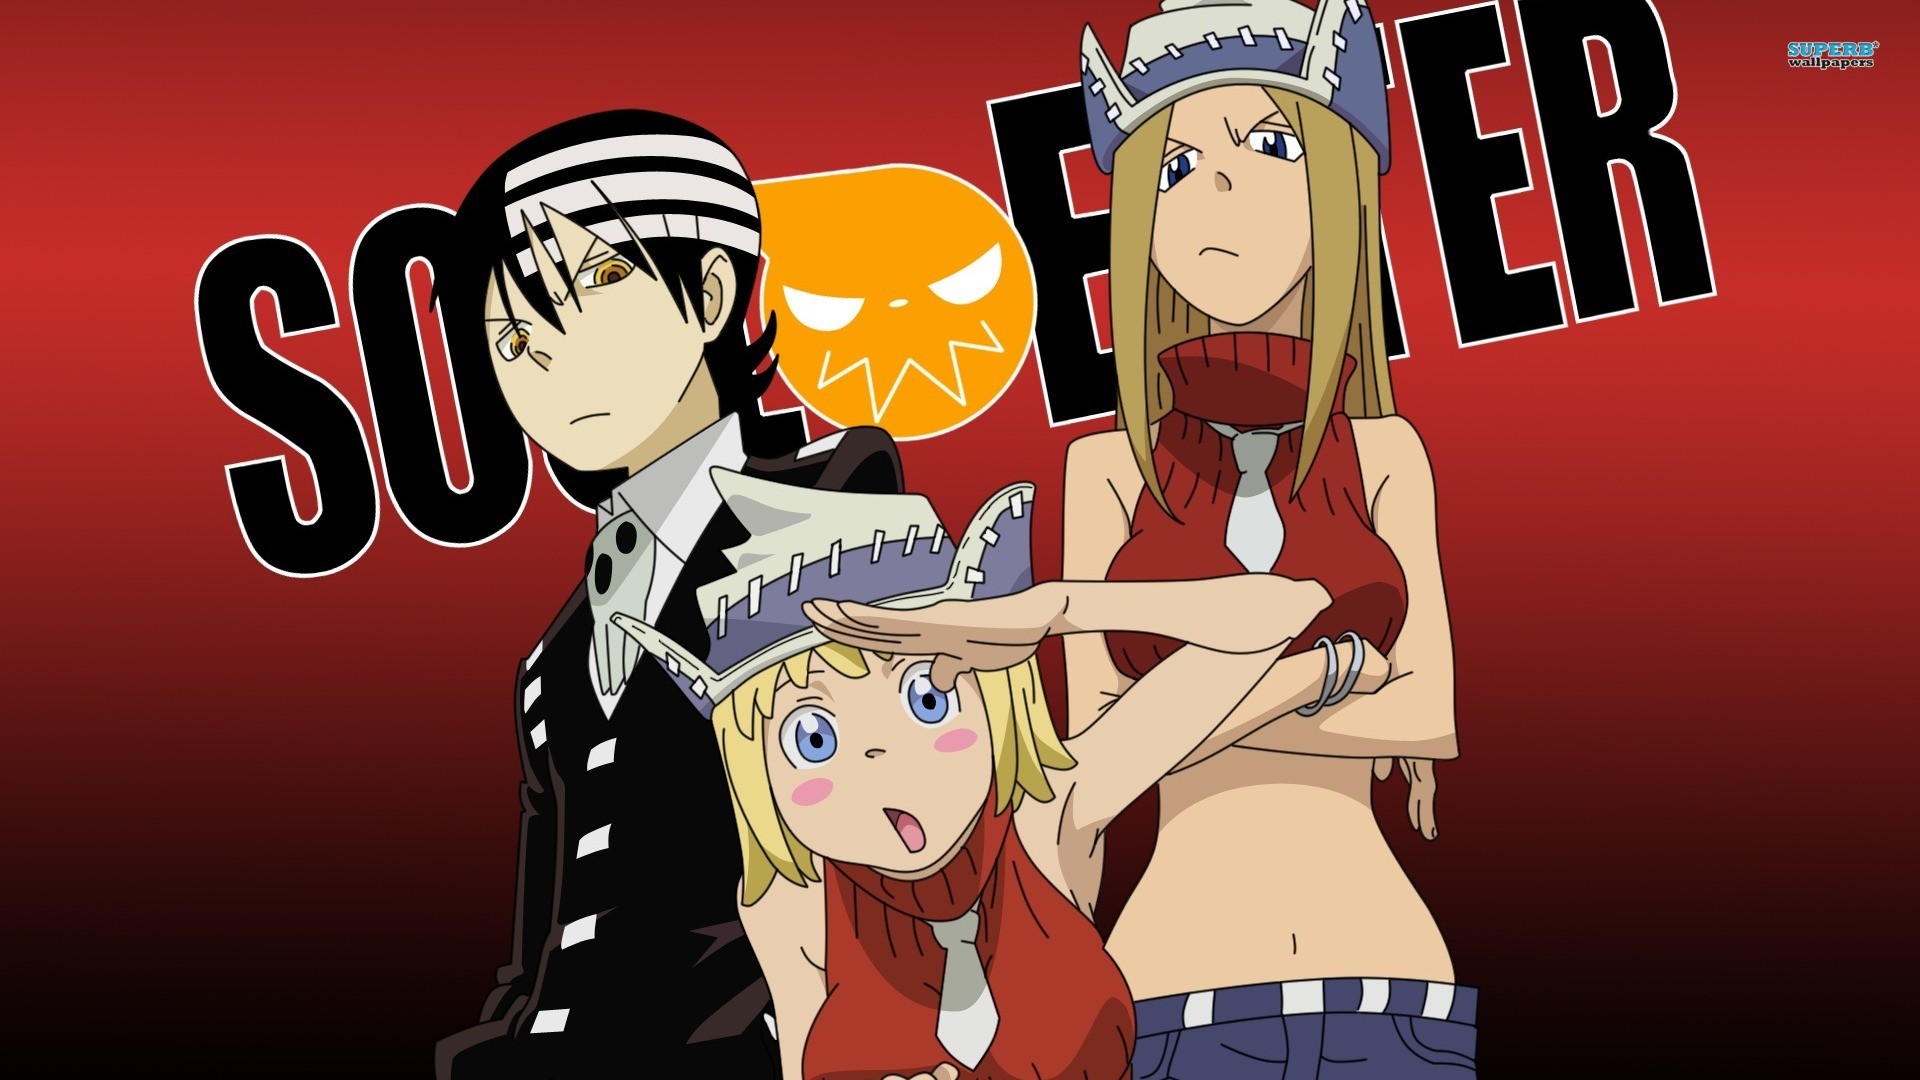 1920x1080 ZufÃ¤llig Hintergrund with Anime titled Soul eater